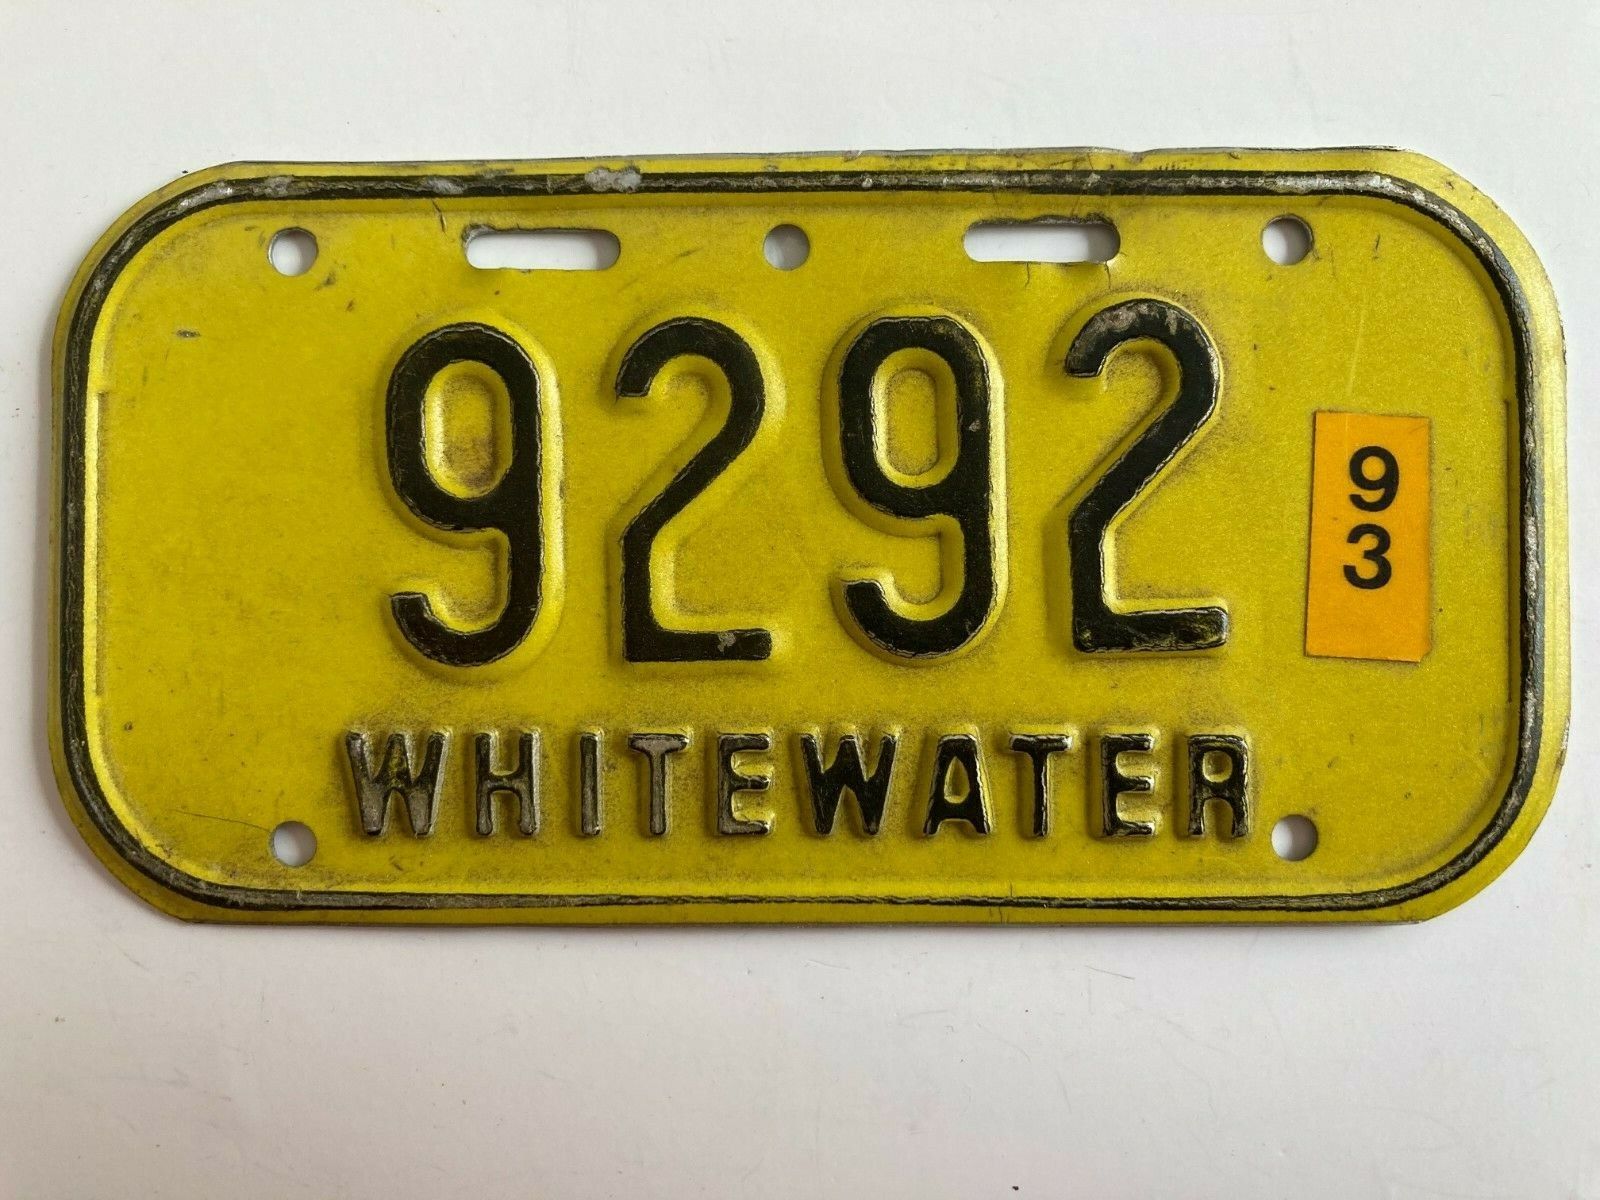 1993 Whitewater Wisconsin Bicycle Bike License Plate - Size: 6 1/8" X 3 1/8"